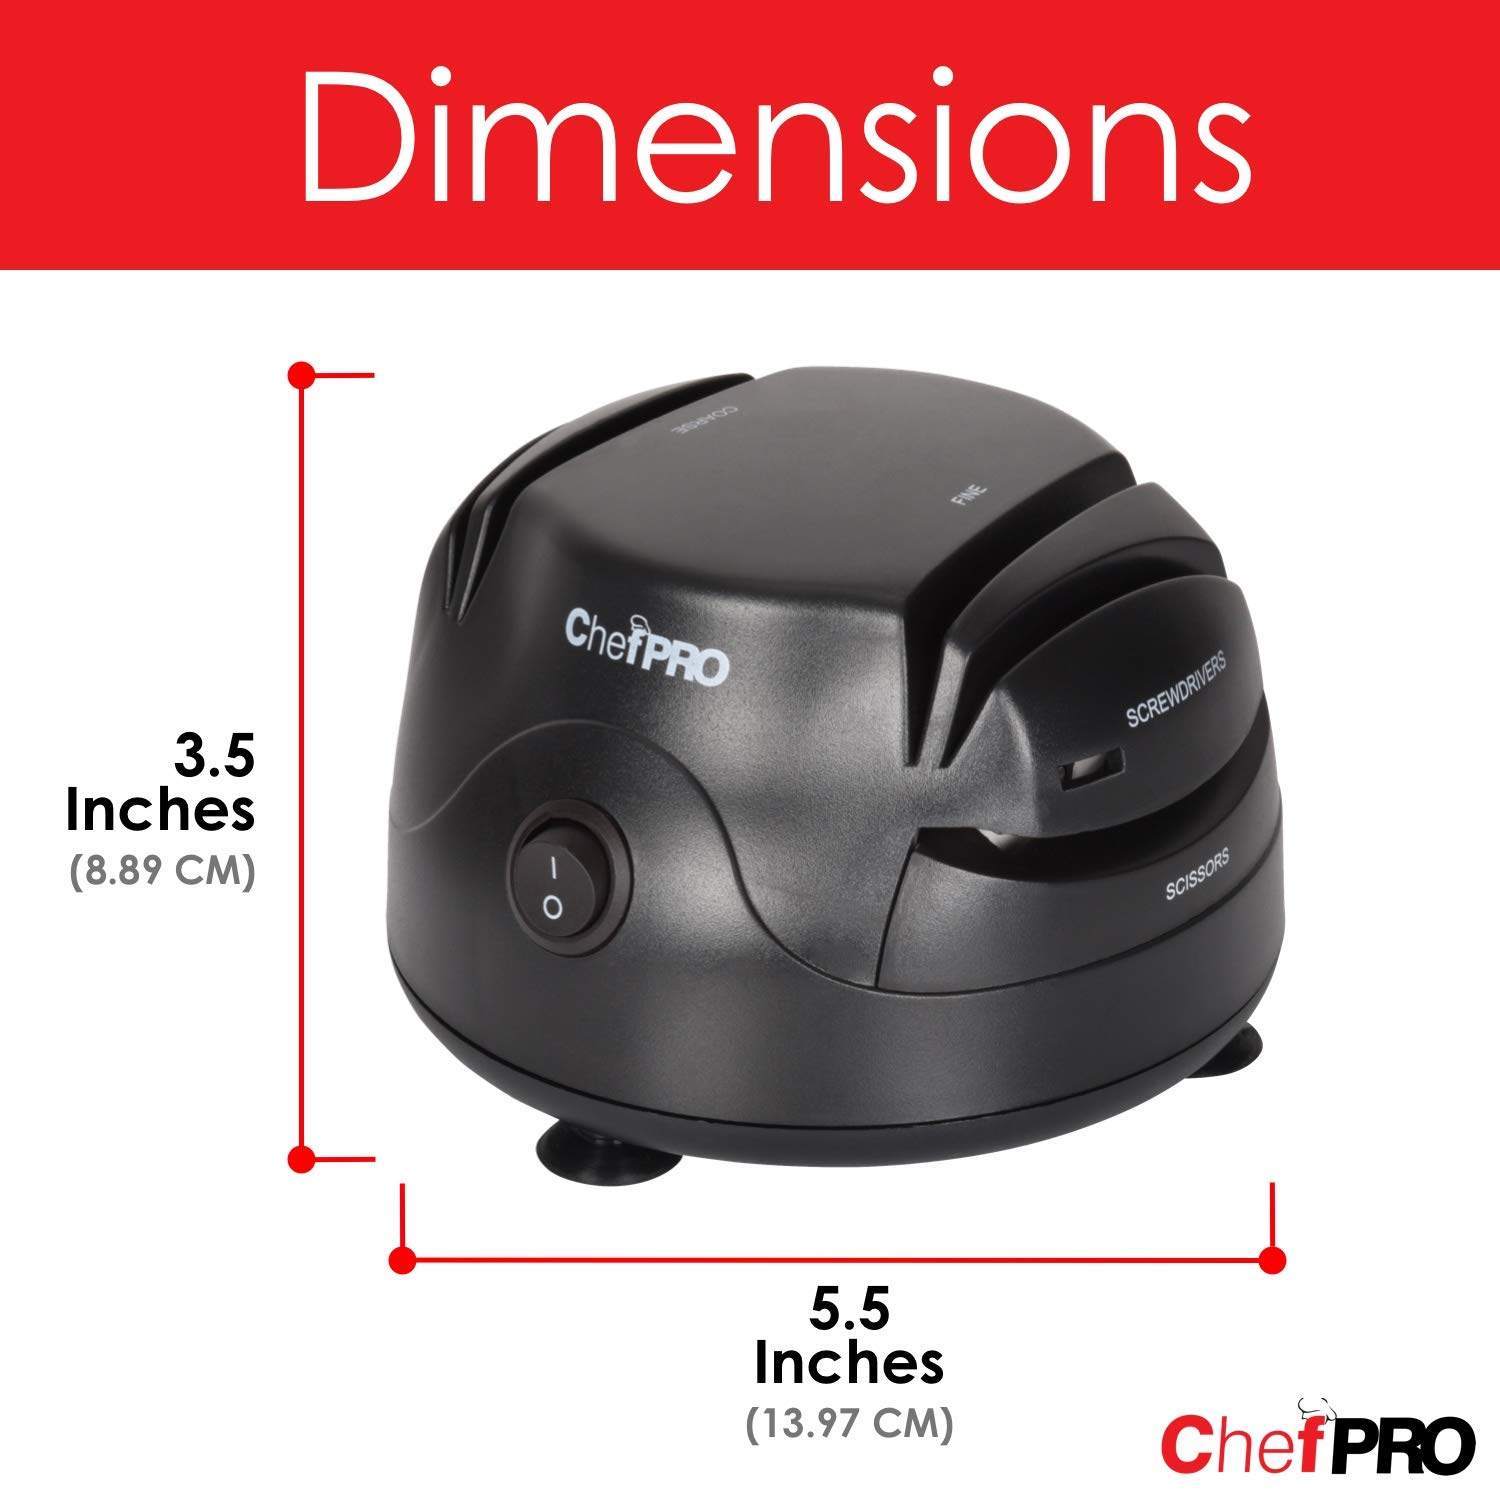 3-In-1 ELECTRIC KNIFE SHARPENER SYSTEM by ChefPRO, Great for Kitchen and Sport Knives, Scissors, Screwdrivers, 2-Stage Sharpening System Appliance, Compact Quick, Easy Design, Retractable Cord, Black